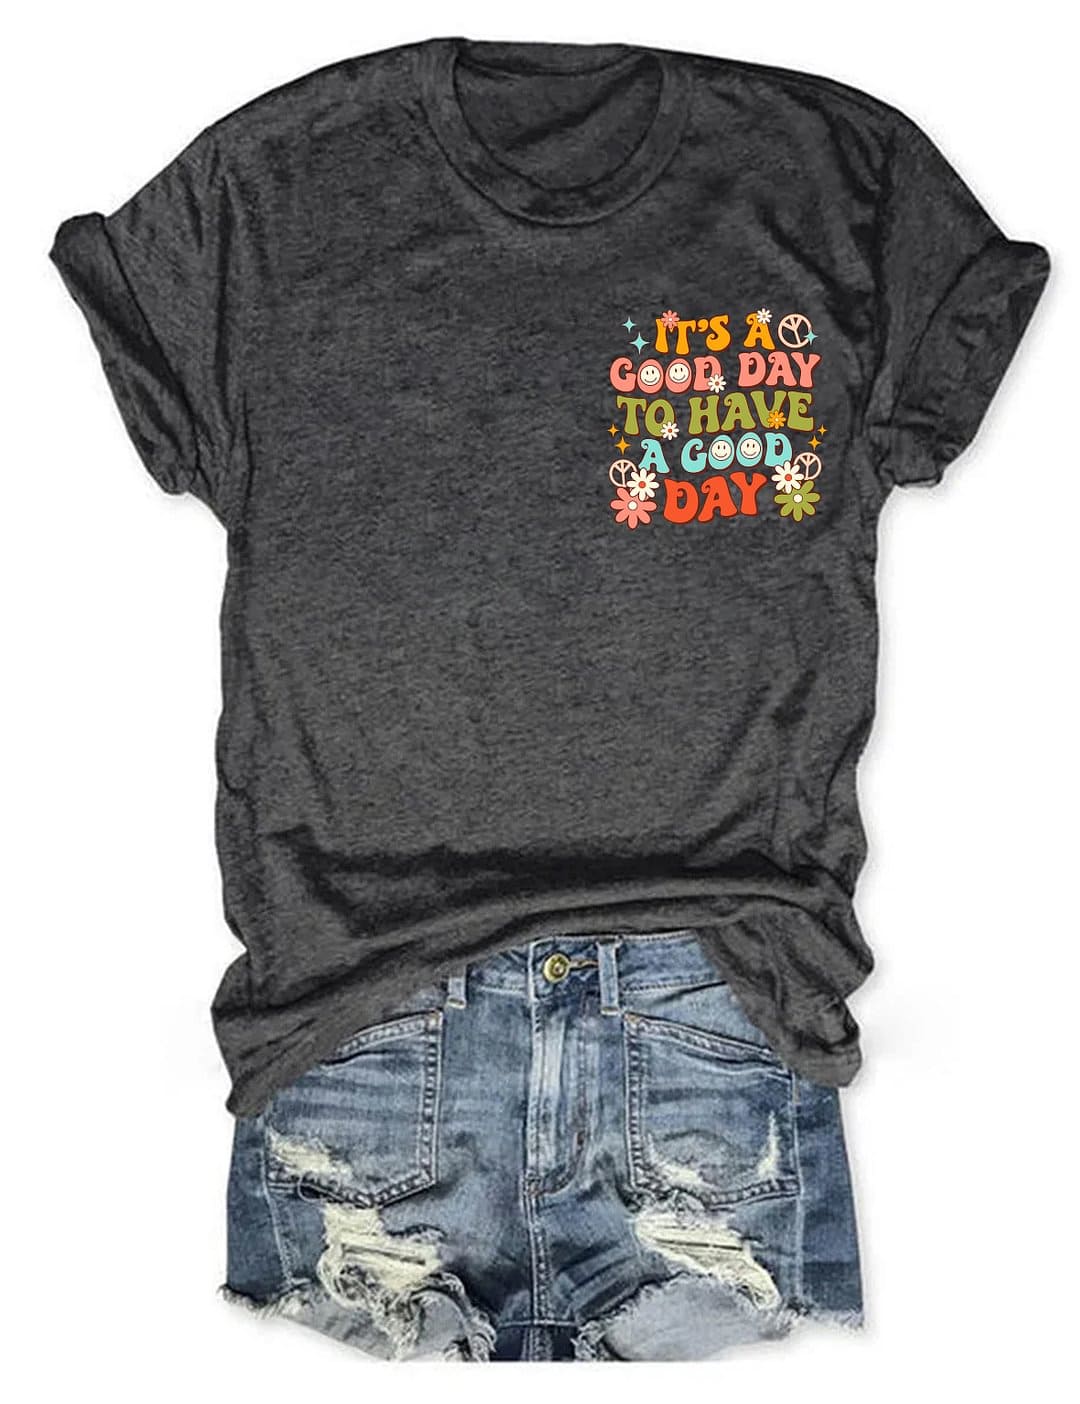 It's a Good Day To Have a Good Day T-shirt